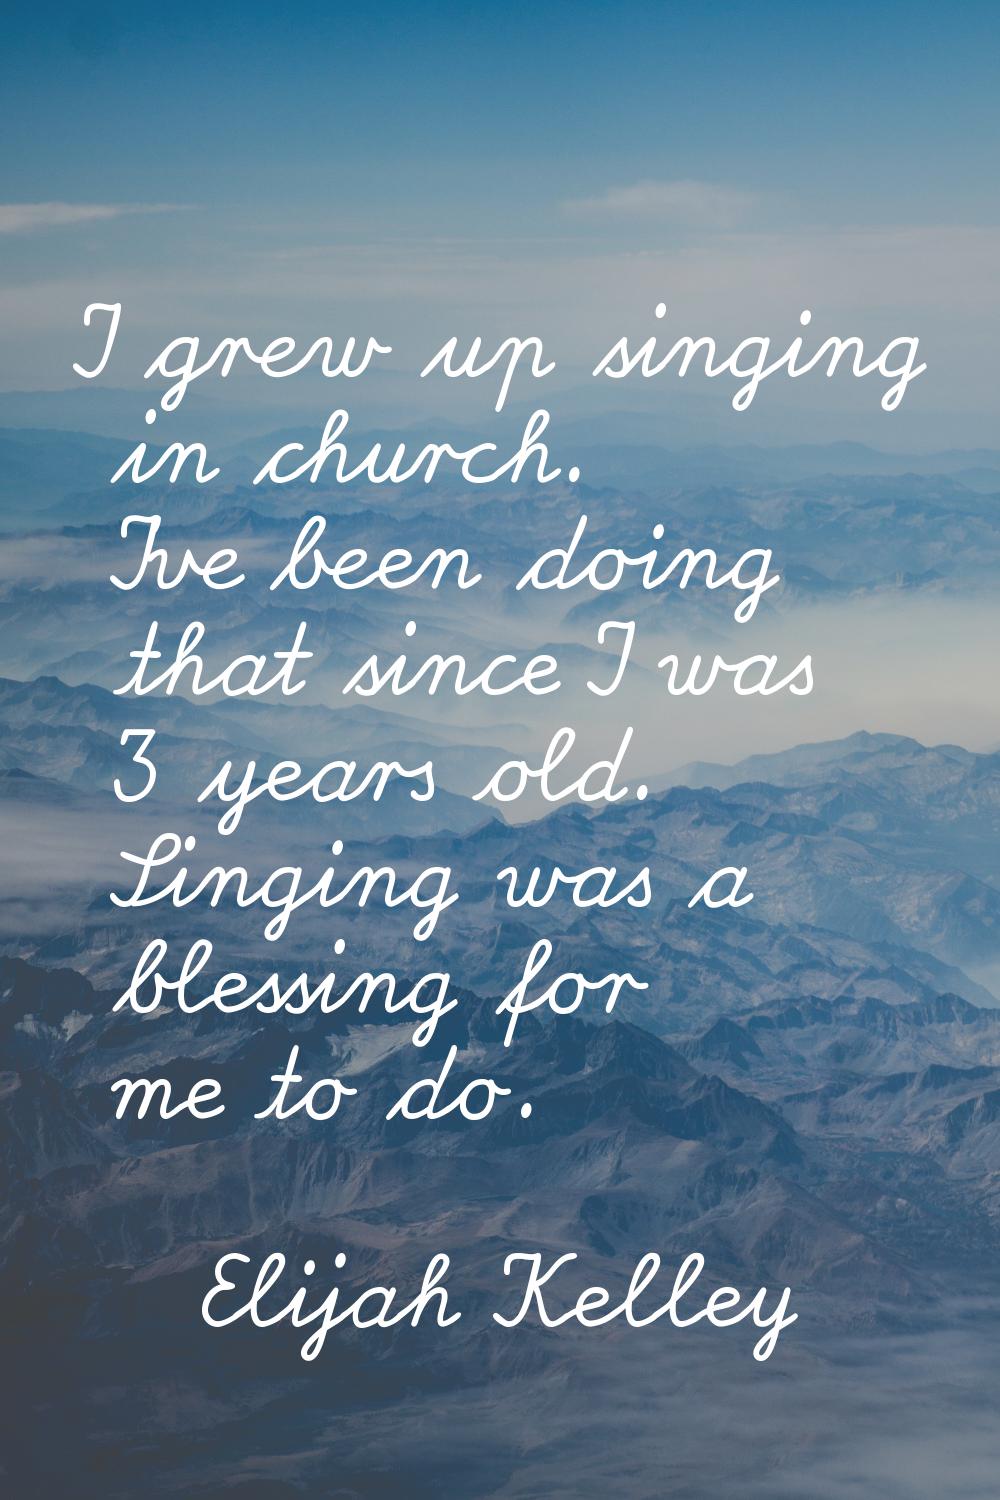 I grew up singing in church. I've been doing that since I was 3 years old. Singing was a blessing f